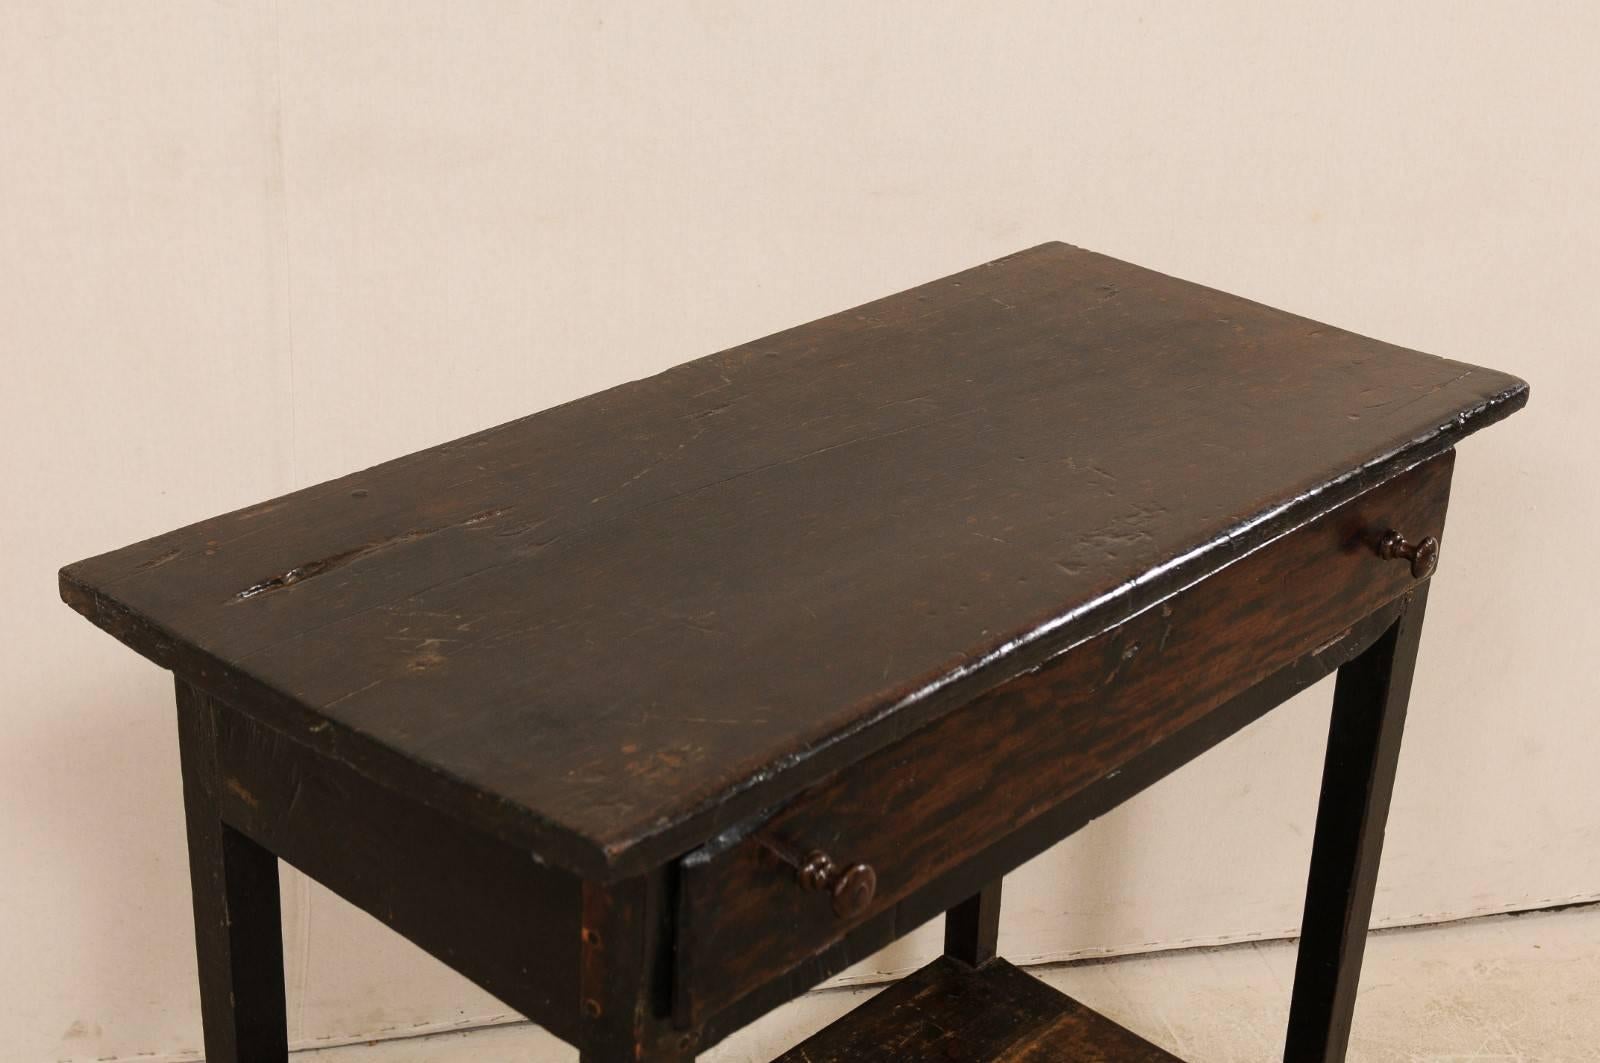 Rustic Early 19th Century Rectangular Brazilian Peroba Tropical Dark Wood Side Table For Sale